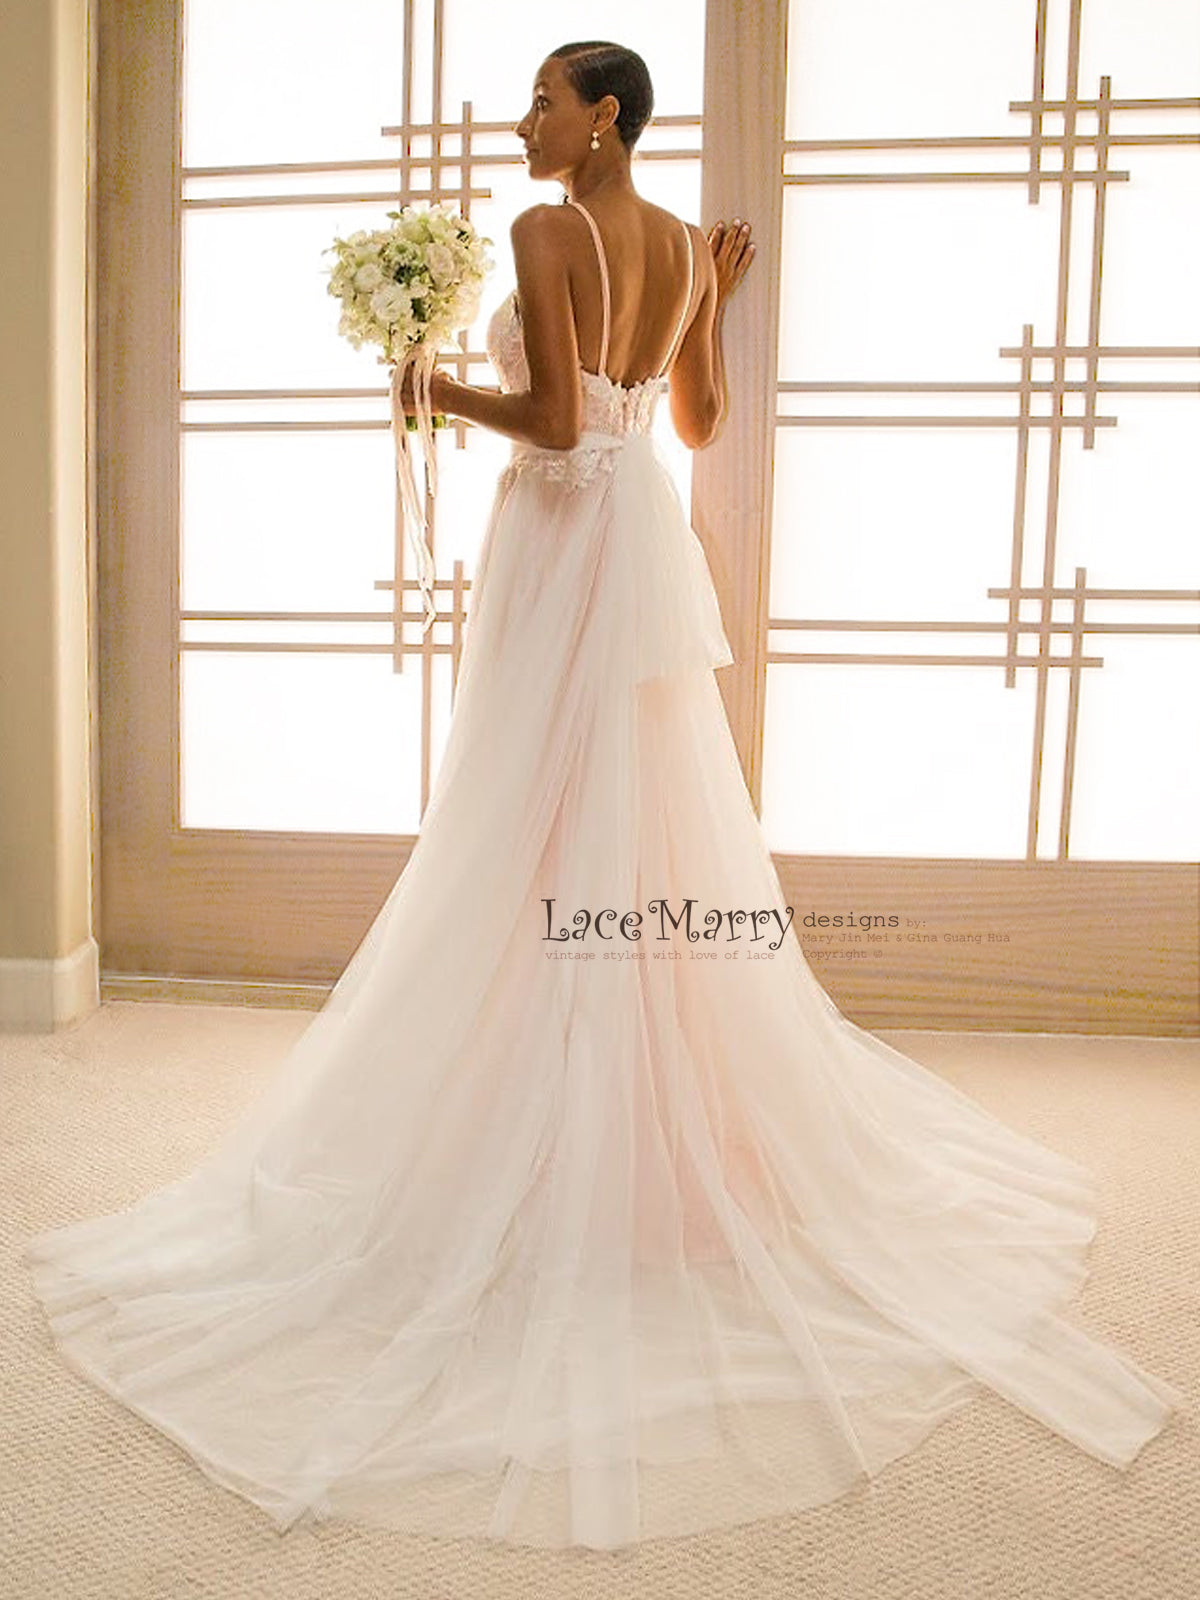 Rose Gold Beach Wedding Dress from Lace and Soft Tulle - LaceMarry